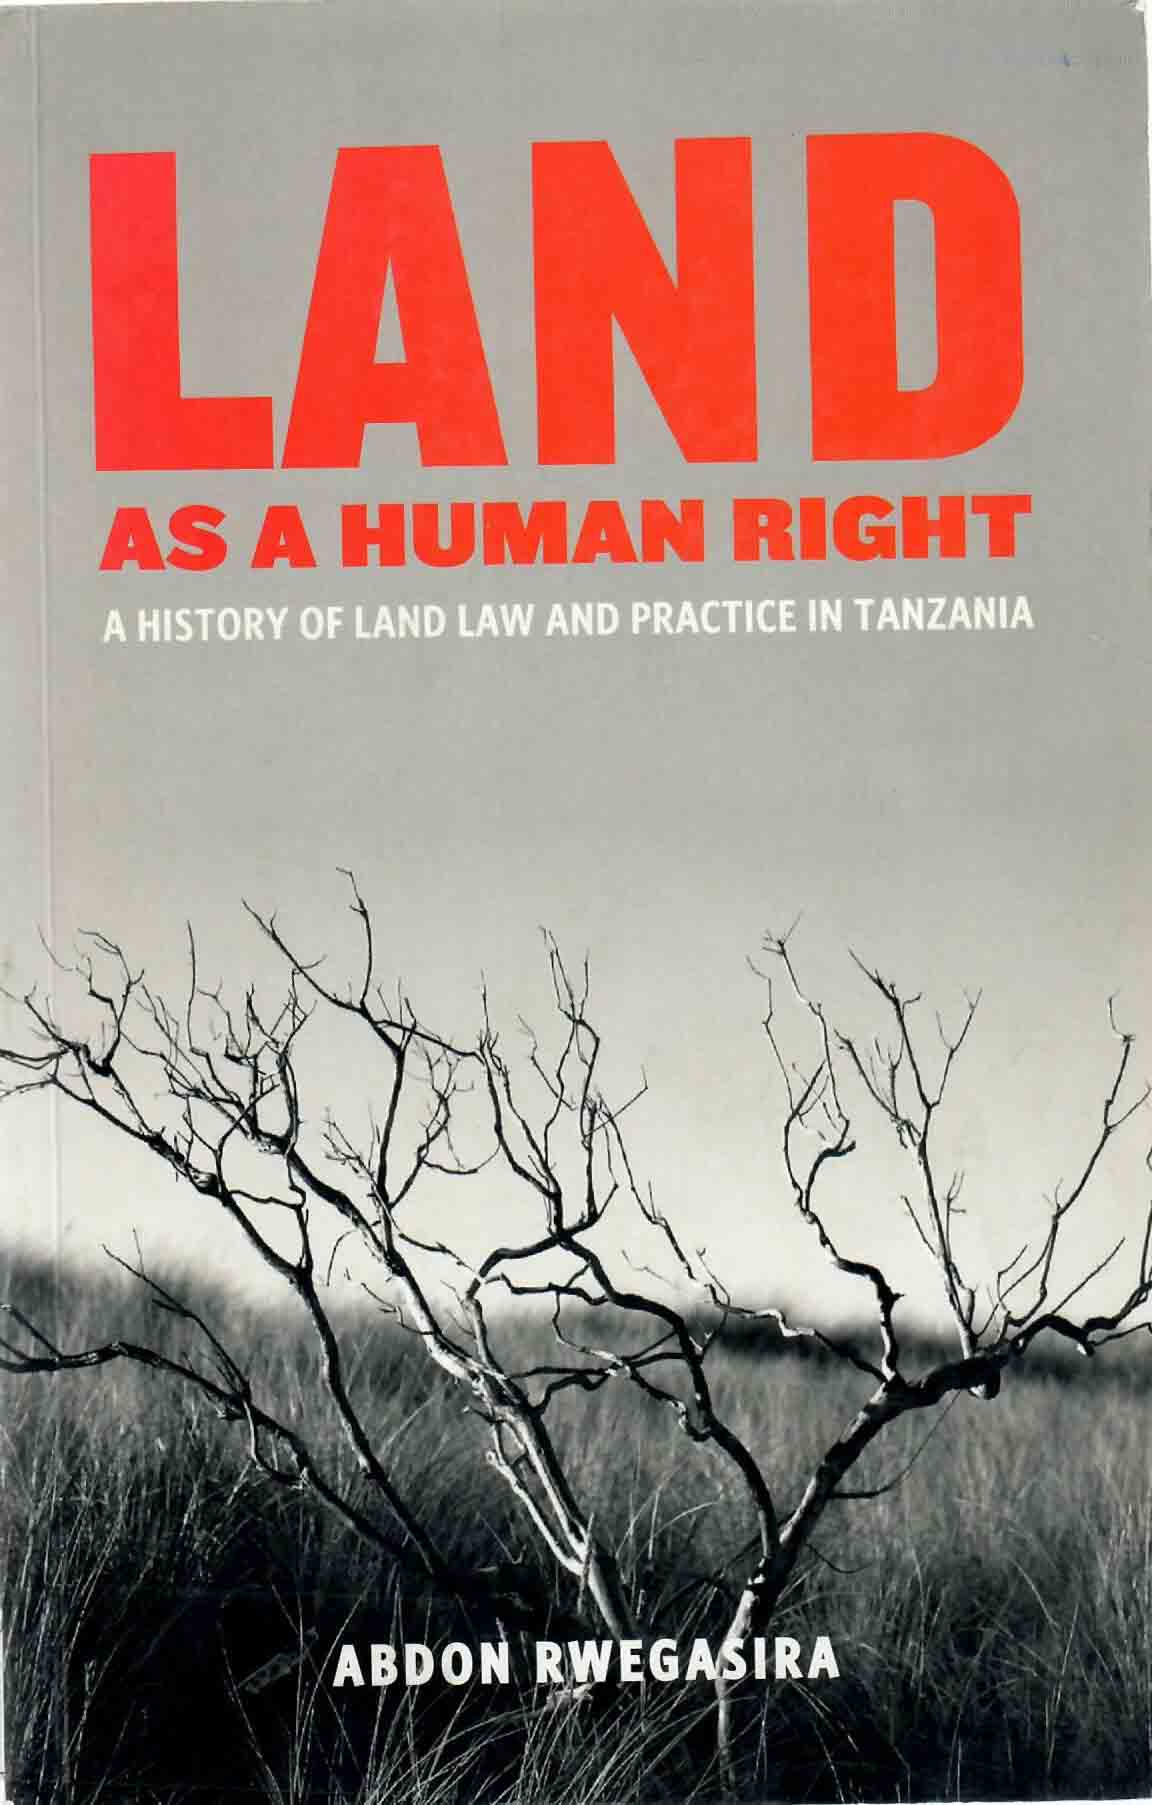 LAND AS A HUMAN RIGHT